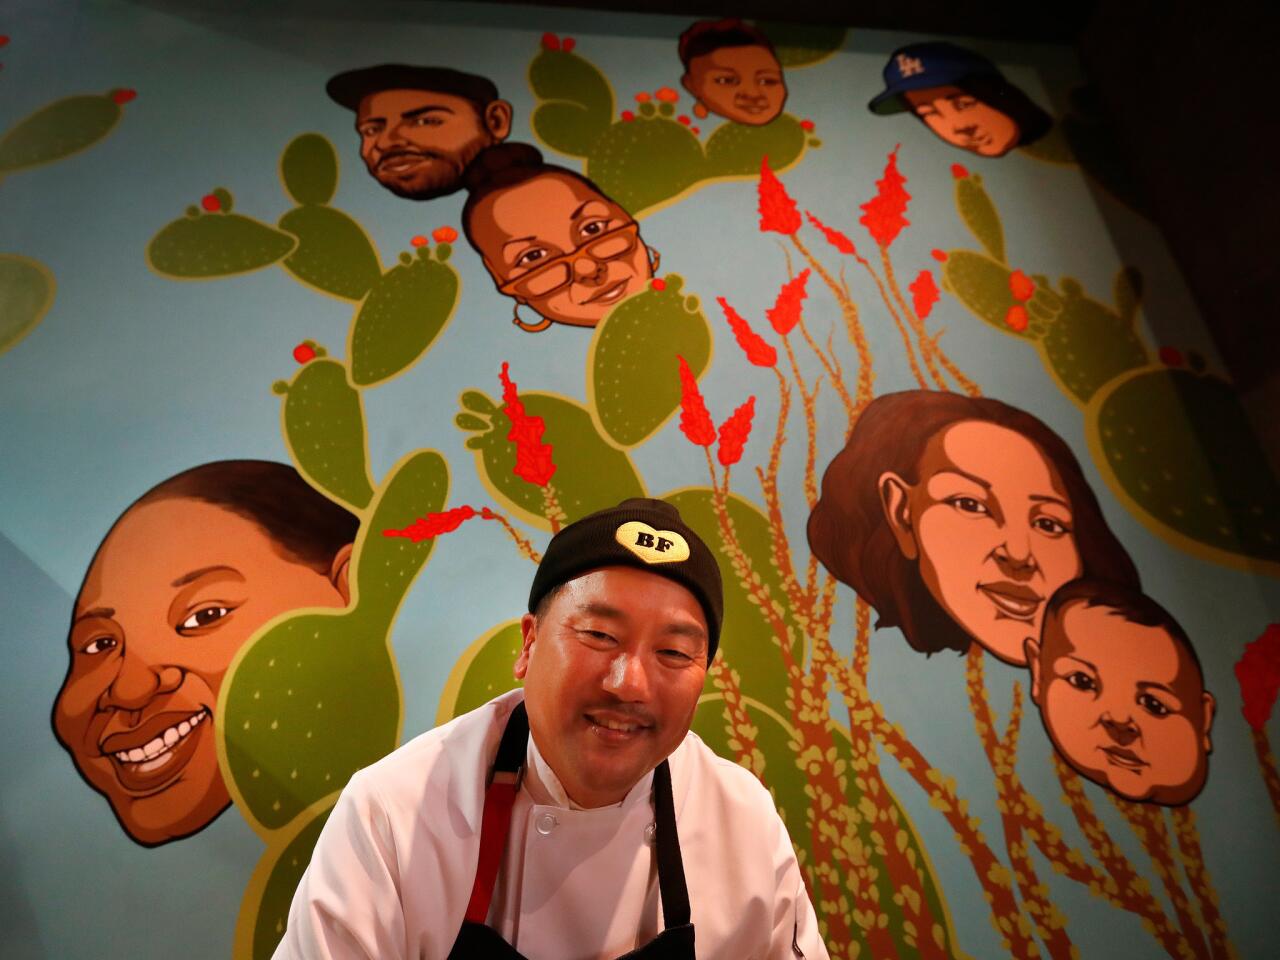 Chef Roy Choi is photographed next to a mural located inside the dining room of his new restaurant, Best Friend, inside the Park MGM hotel on the Las Vegas Strip.